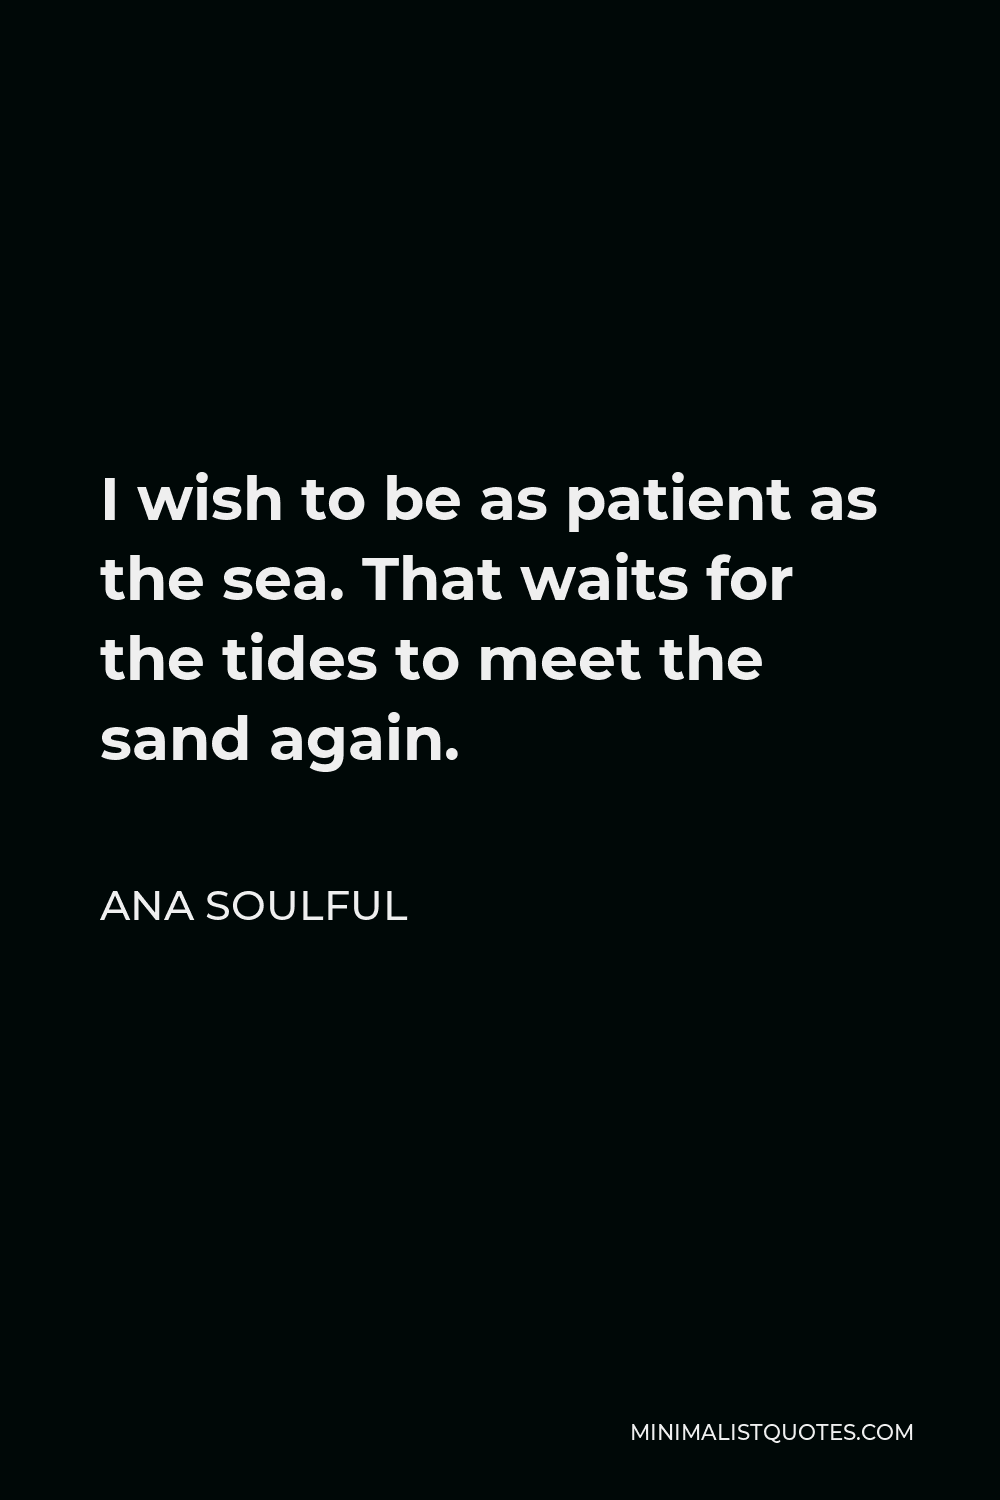 Ana Soulful Quote - I wish to be as patient as the sea. That waits for the tides to meet the sand again.